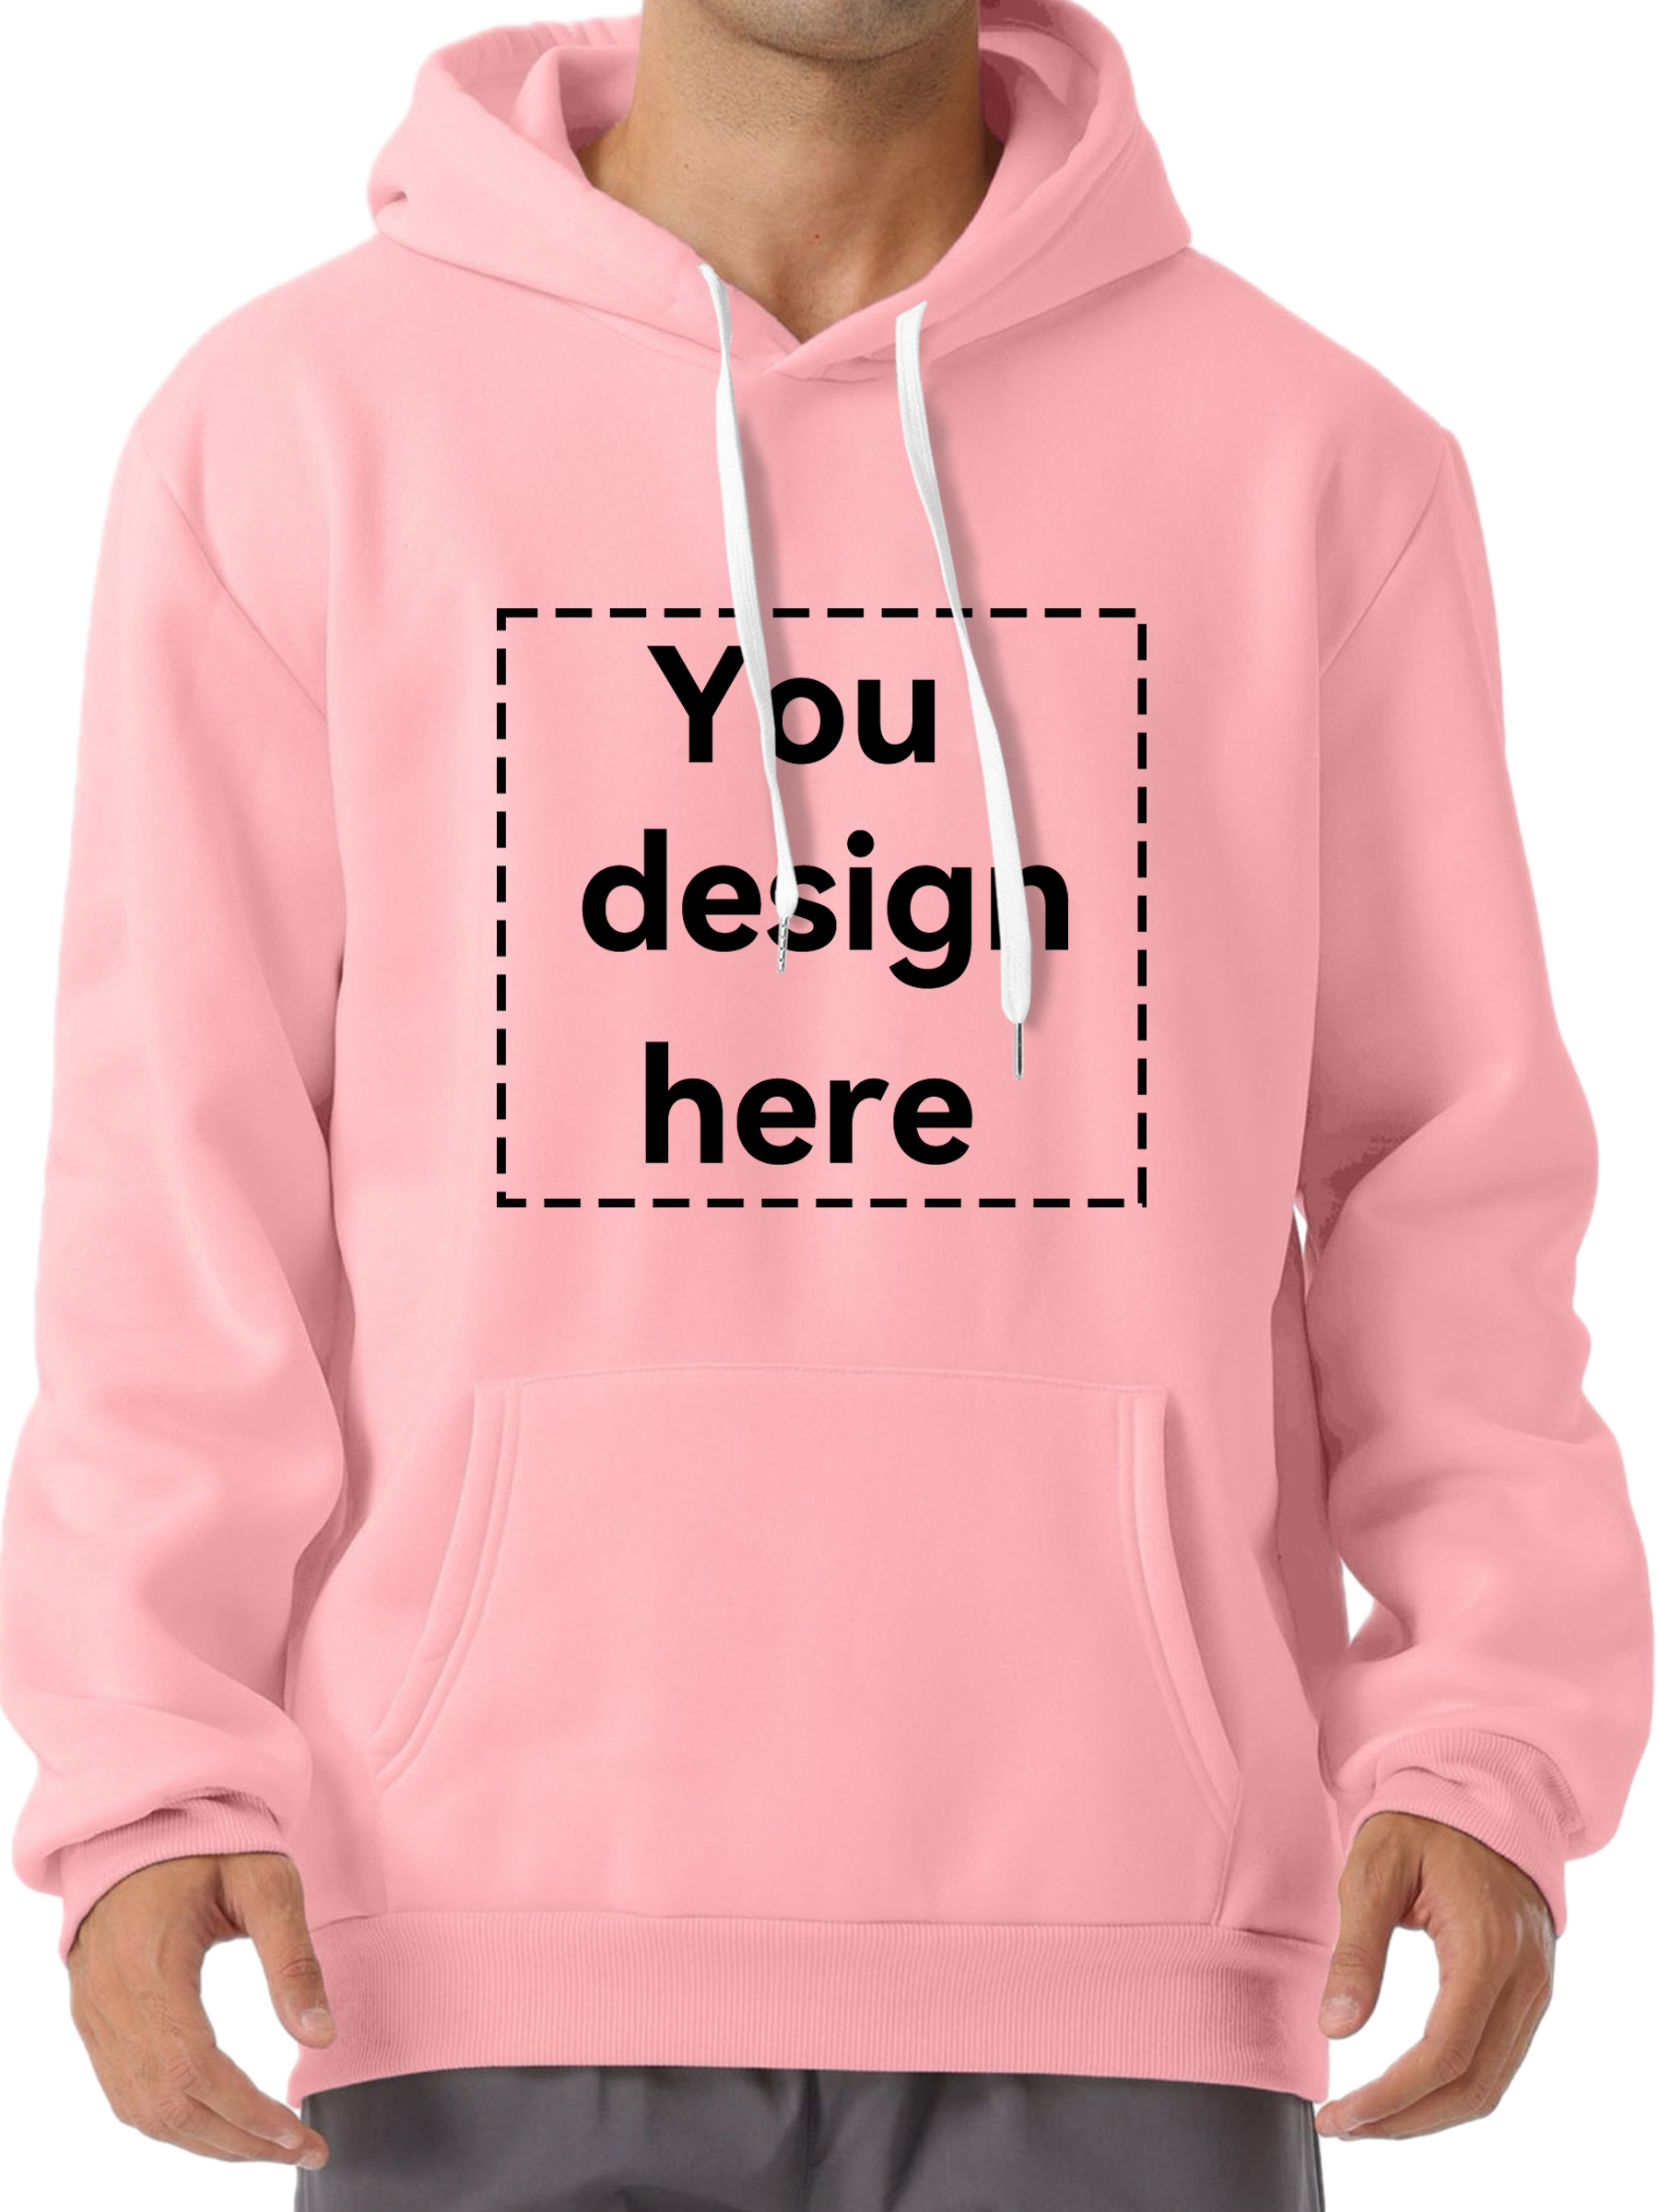 you design here letter print customized kangaroo pocket hoodie casual long sleeve hoodies pullover sweatshirt mens clothing for fall winter details 15